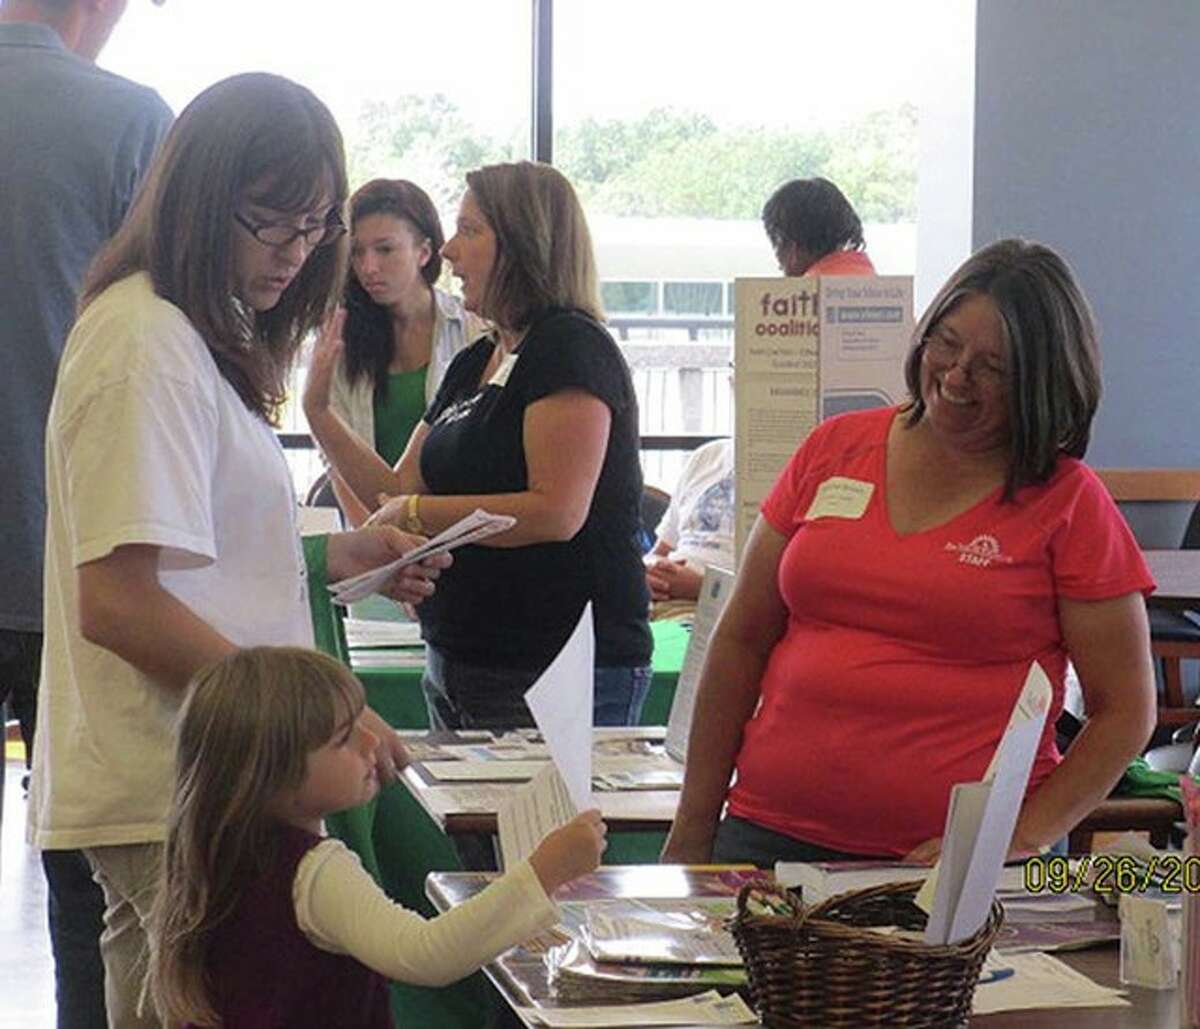 Patti Brown, right, representing the Nature Institute, shares information with a young student at the Madison County Green Schools Resource Fair on the campus of Southern Illinois University Edwardsville.